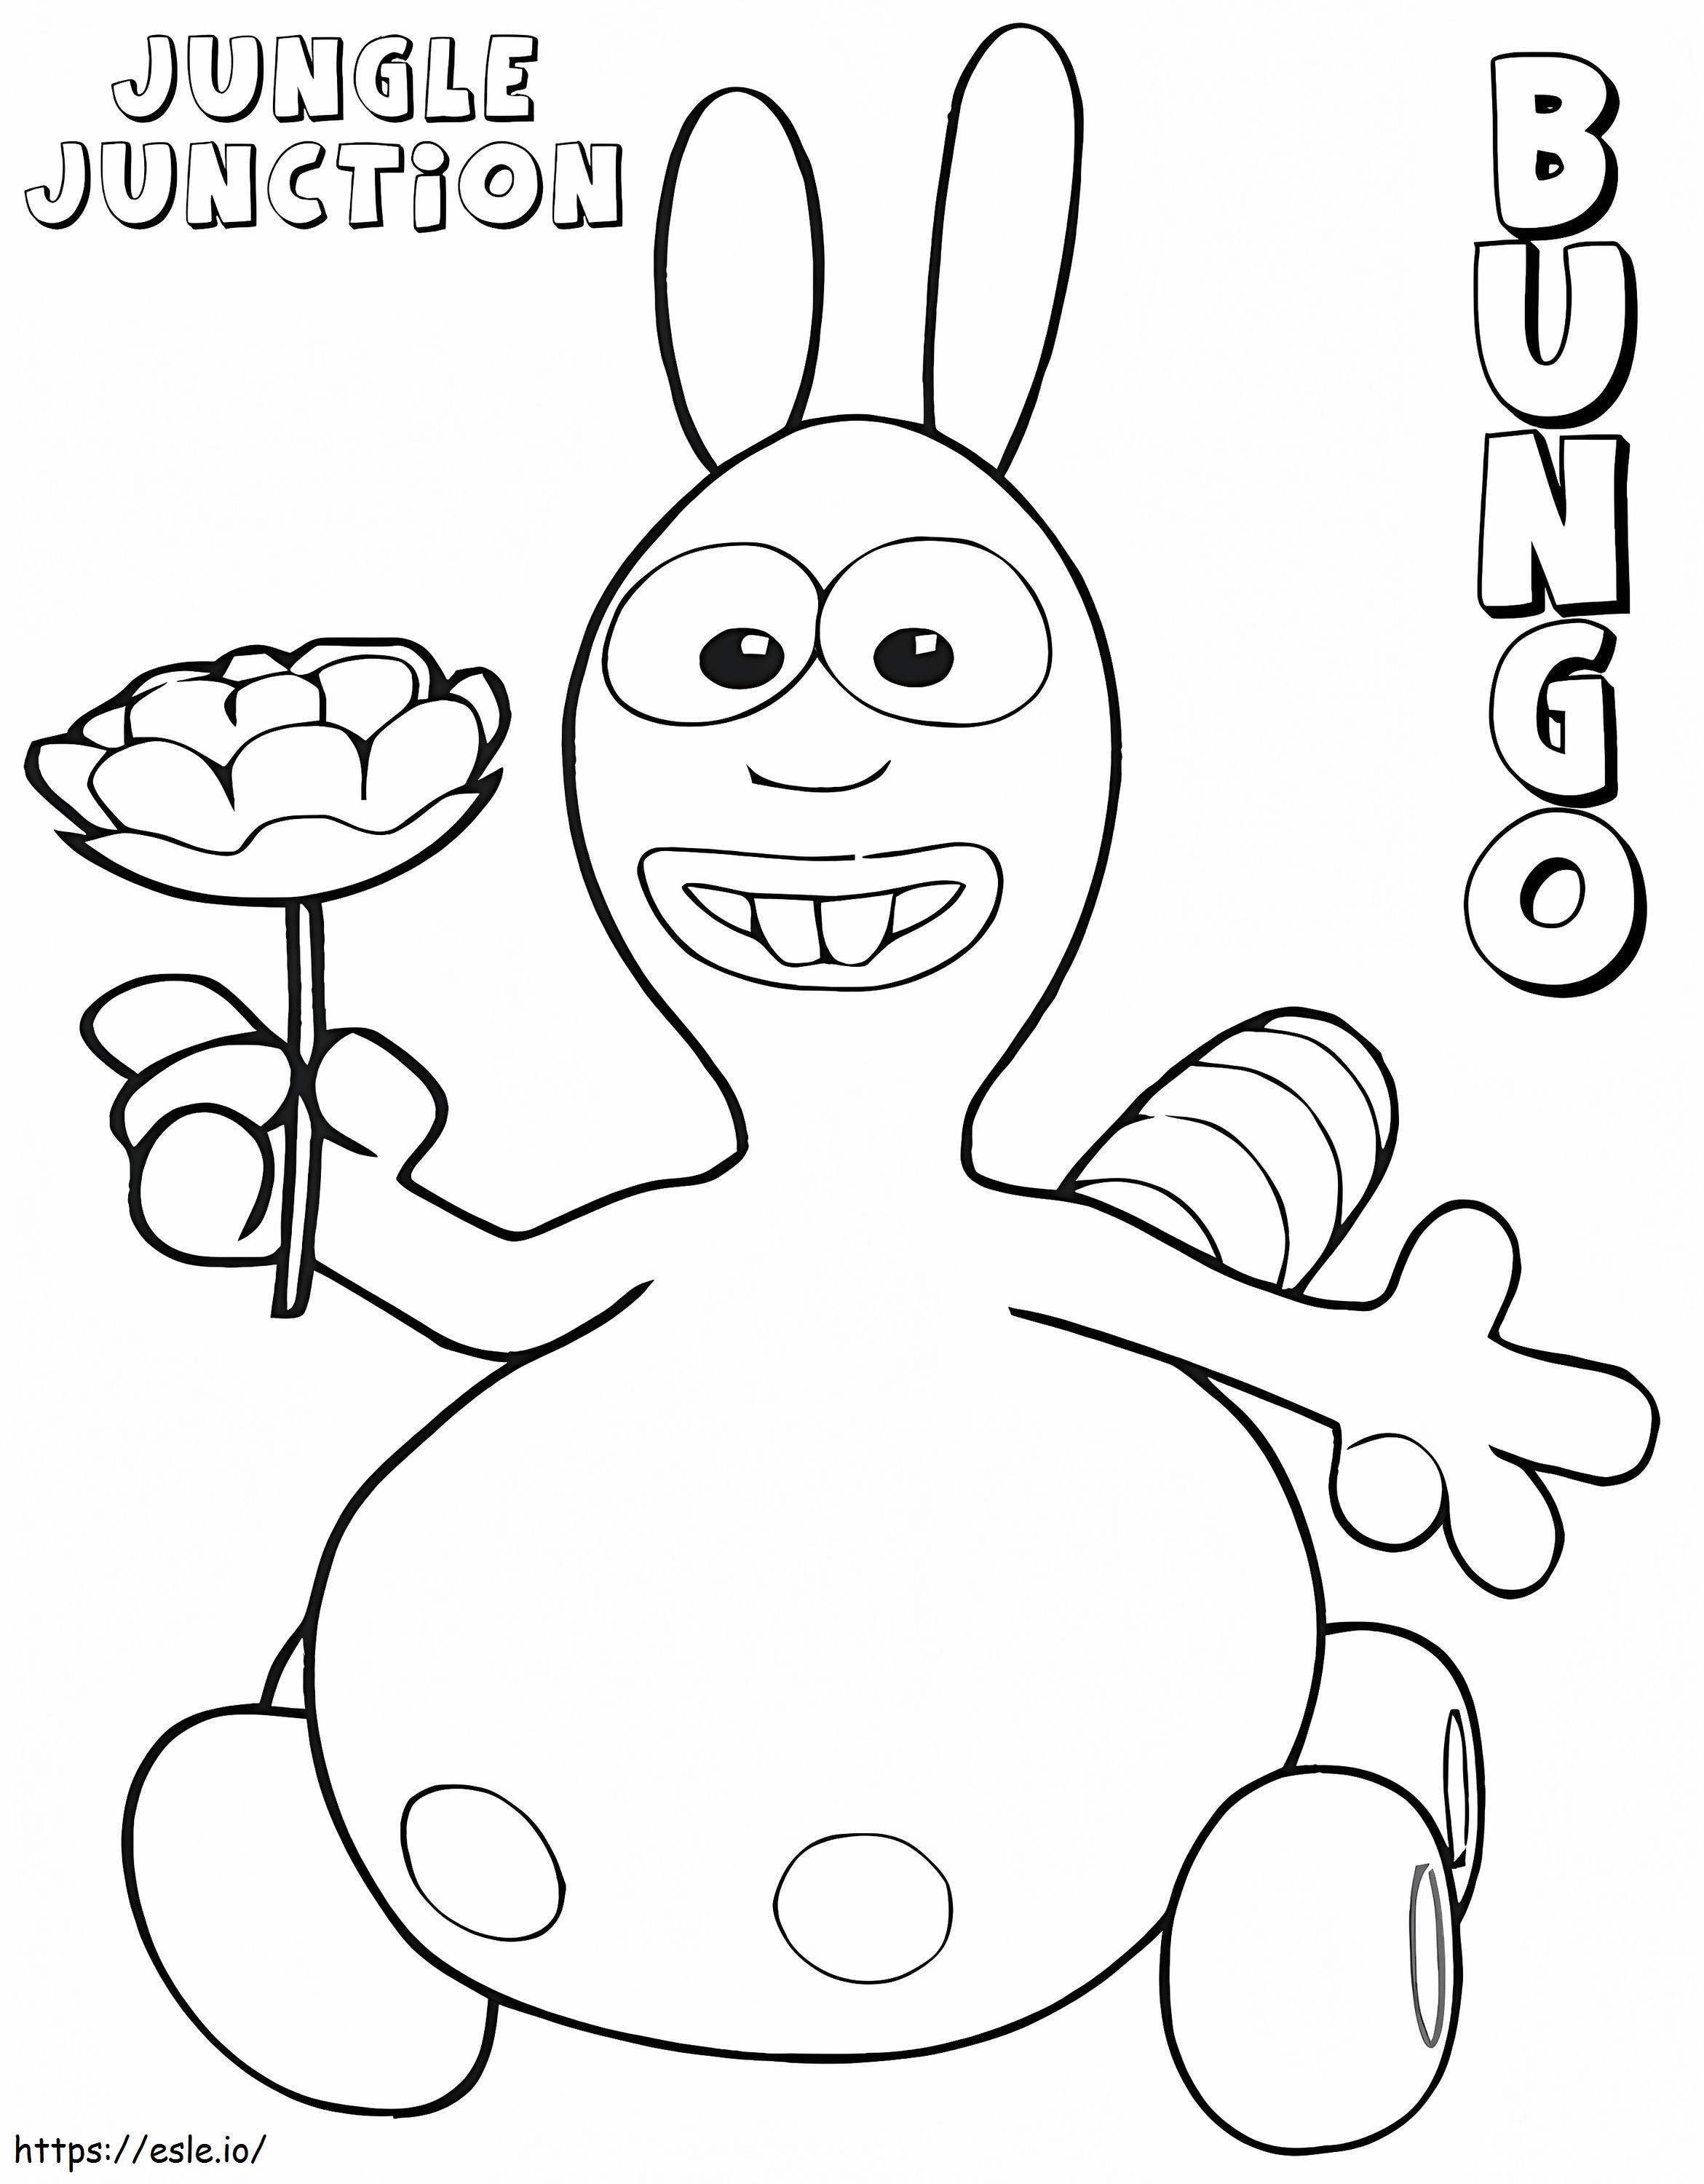 1580804161 Junglejunction6 coloring page